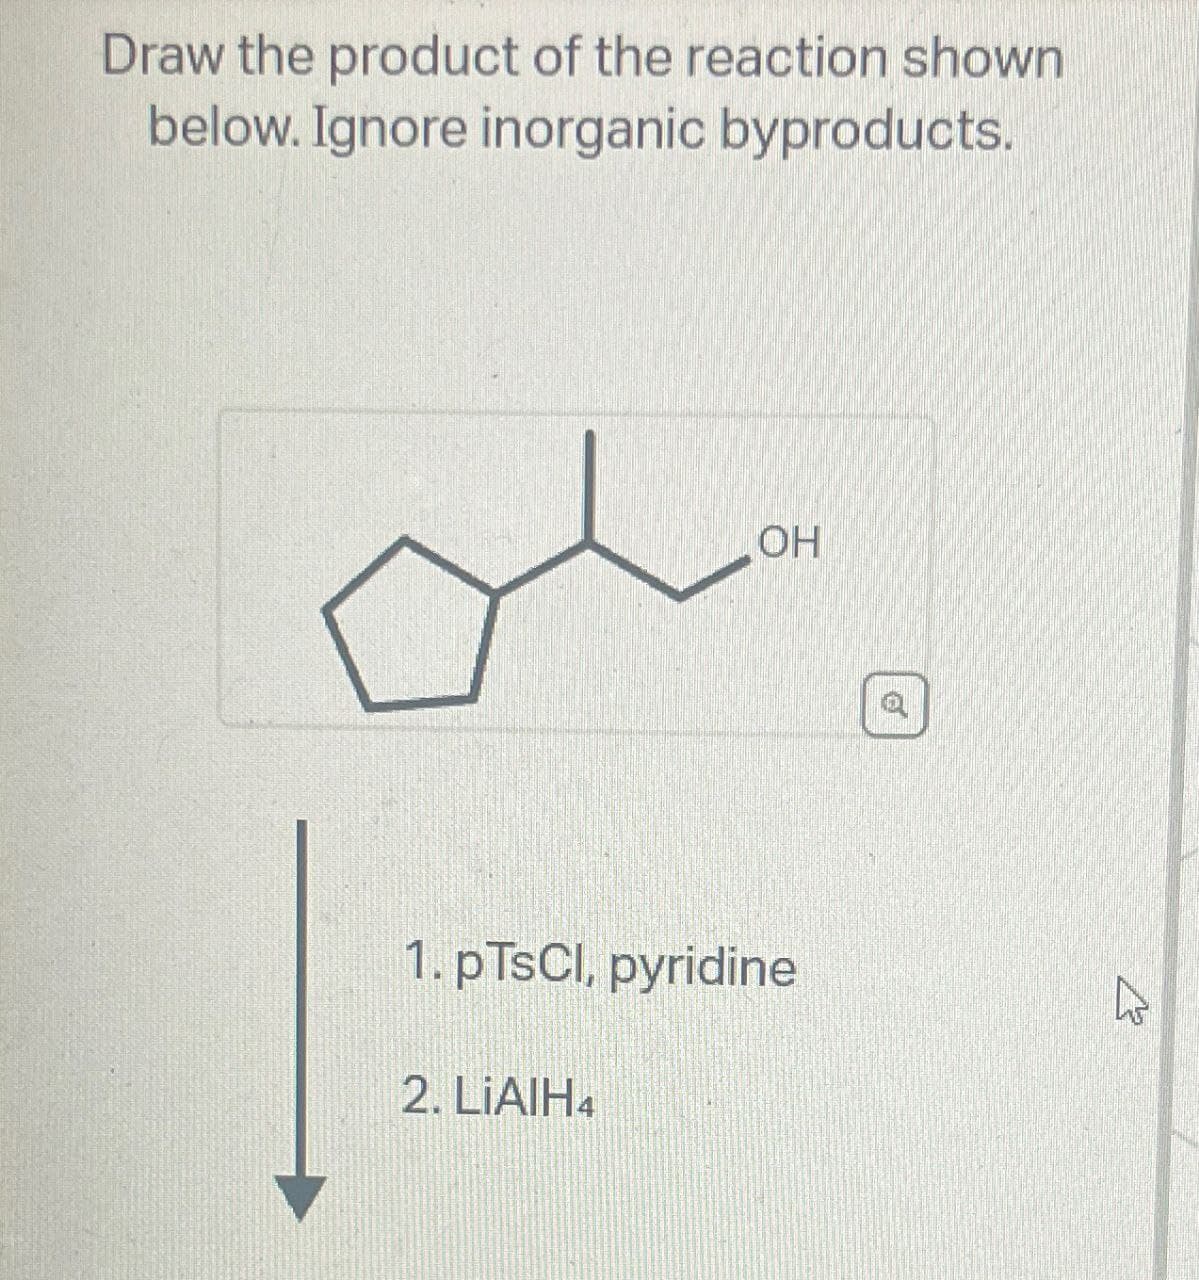 Draw the product of the reaction shown
below. Ignore inorganic byproducts.
1. pTsCl, pyridine
2. LIAIH4
OH
द